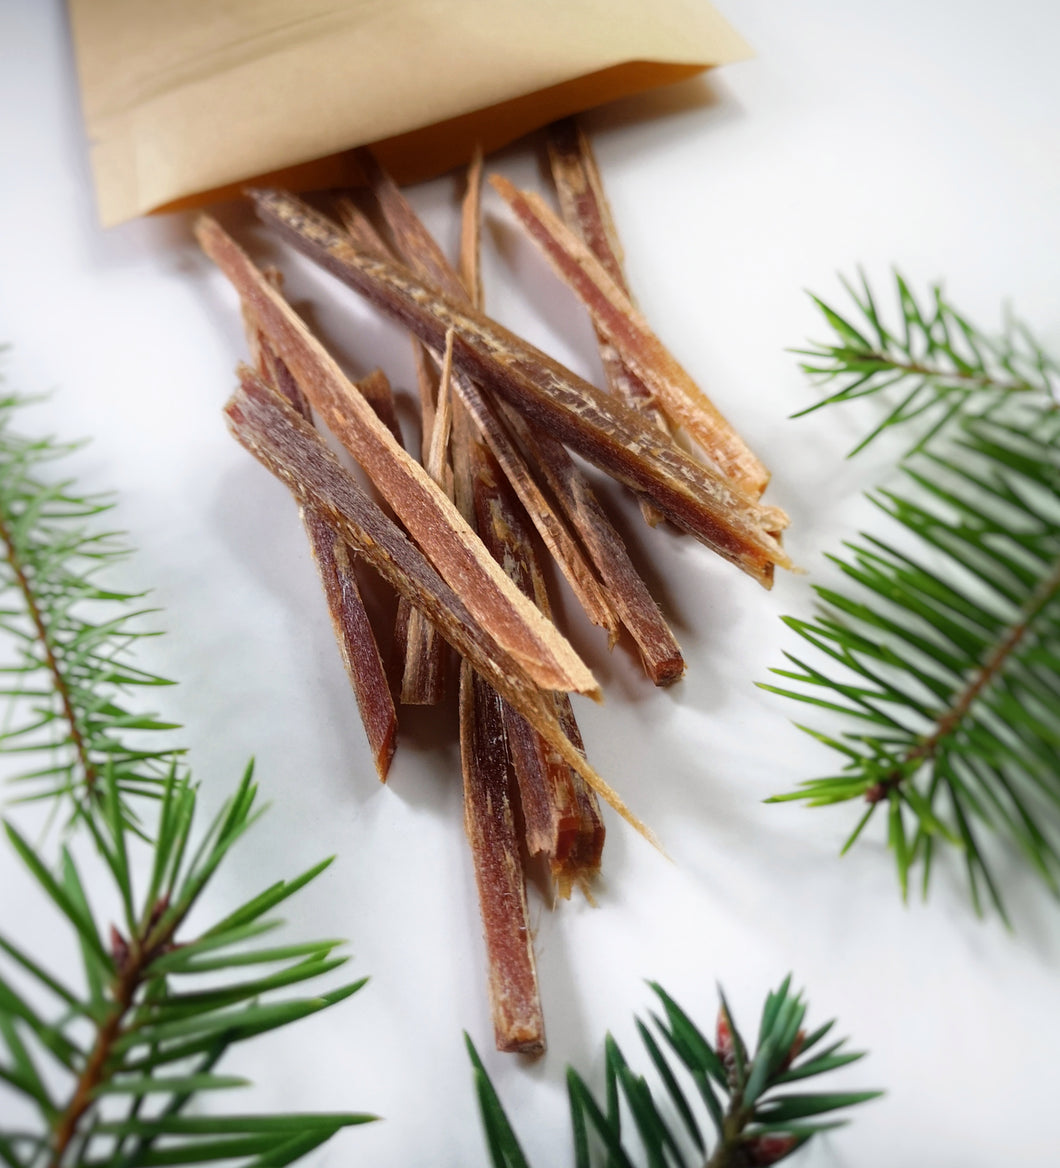 fir tree pitch wood resin incense fatwood